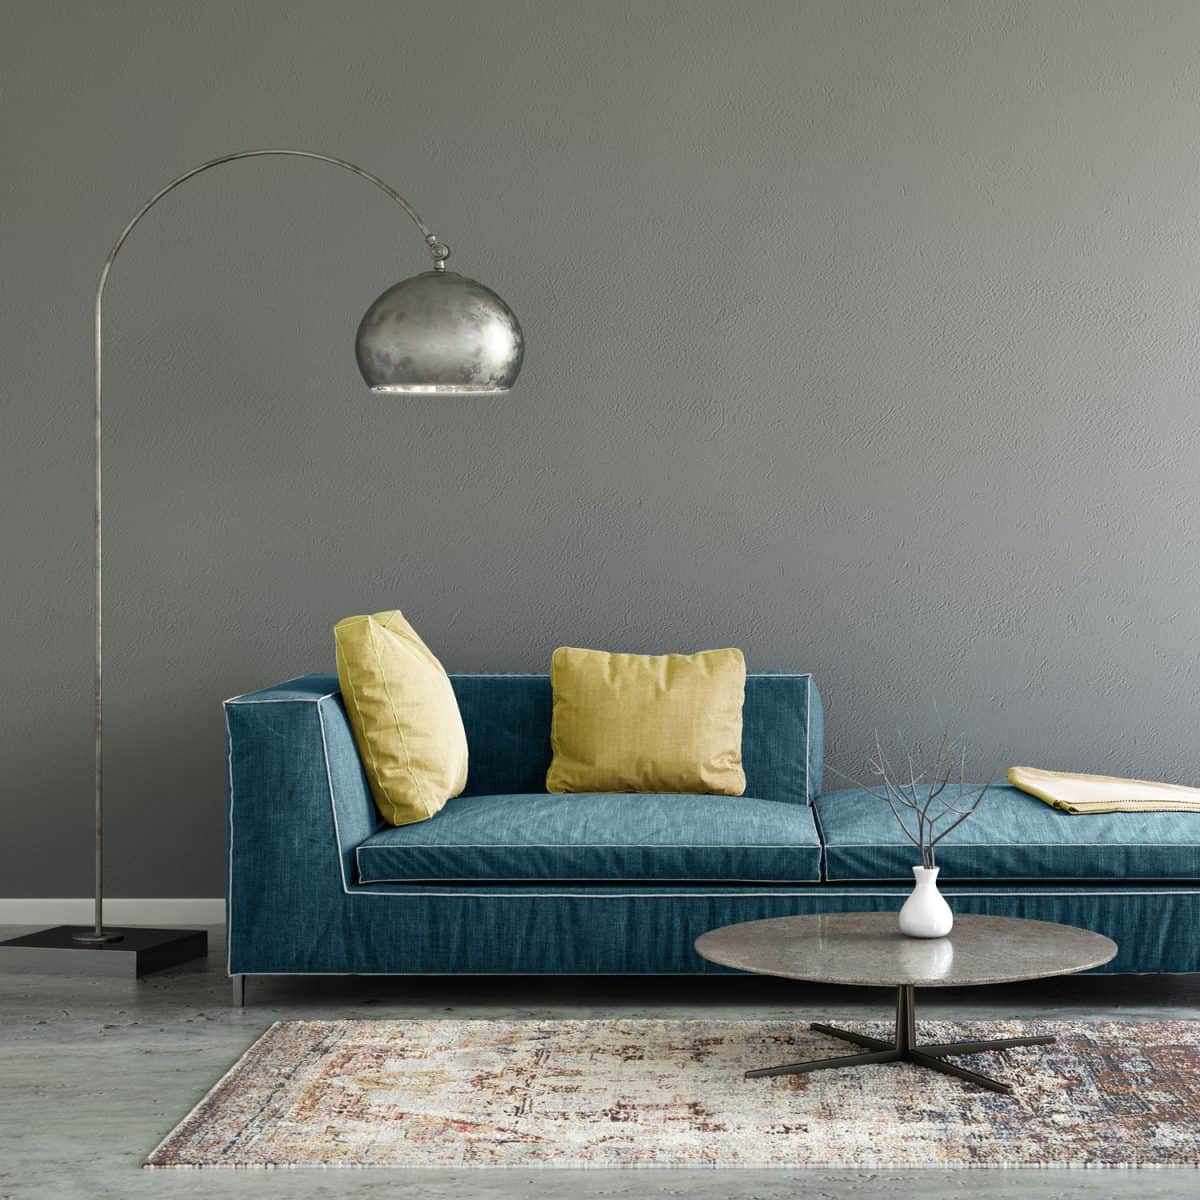 A blue sectional sofa with yellow throw pillows inside a gray living room